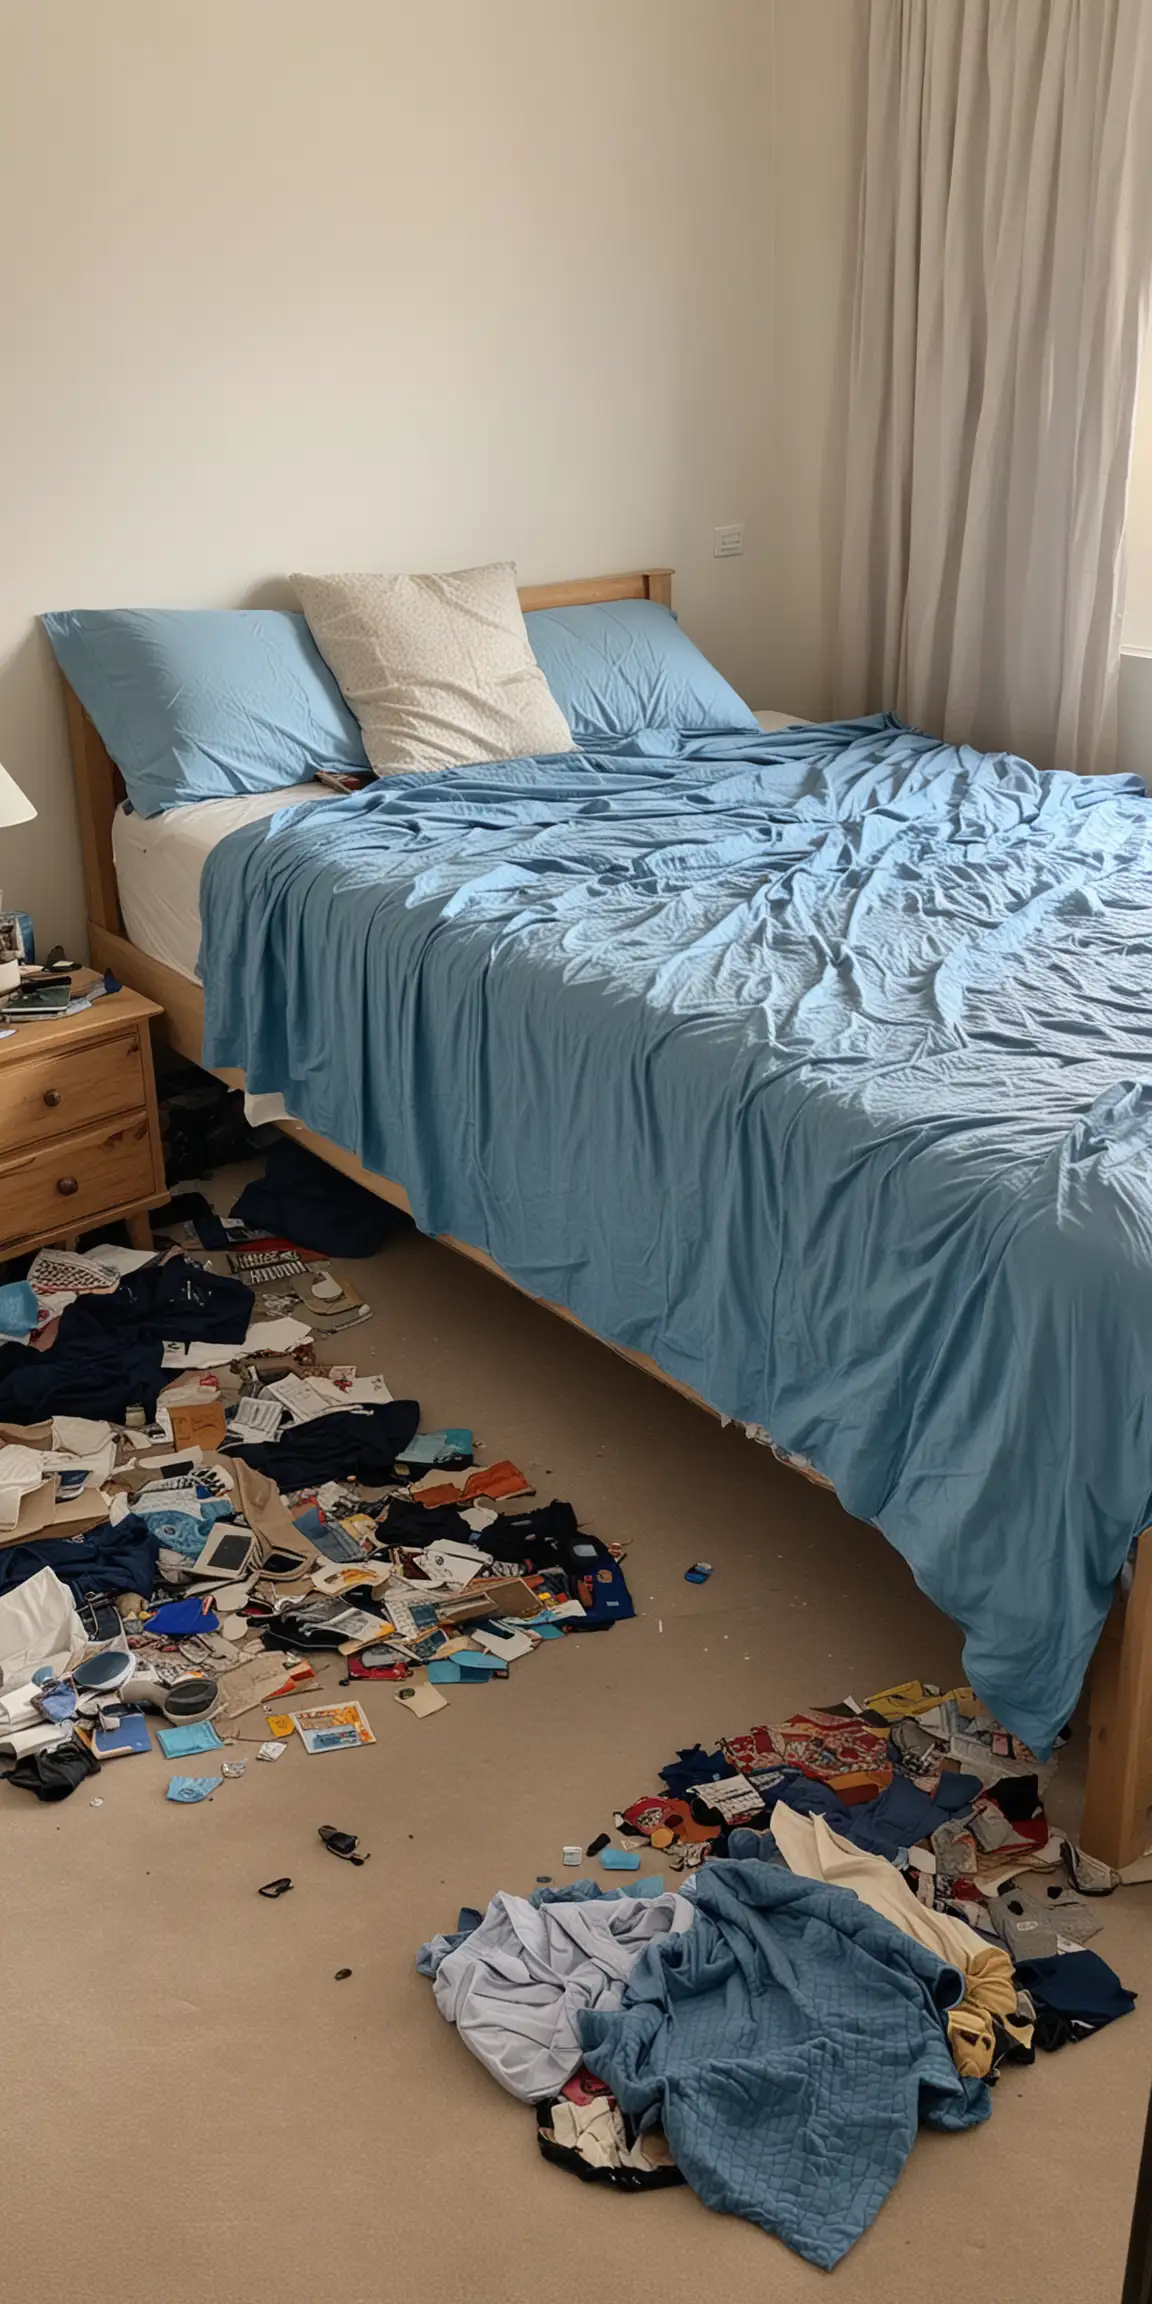 ugc image of a messy bedroom with blue bed sheet.